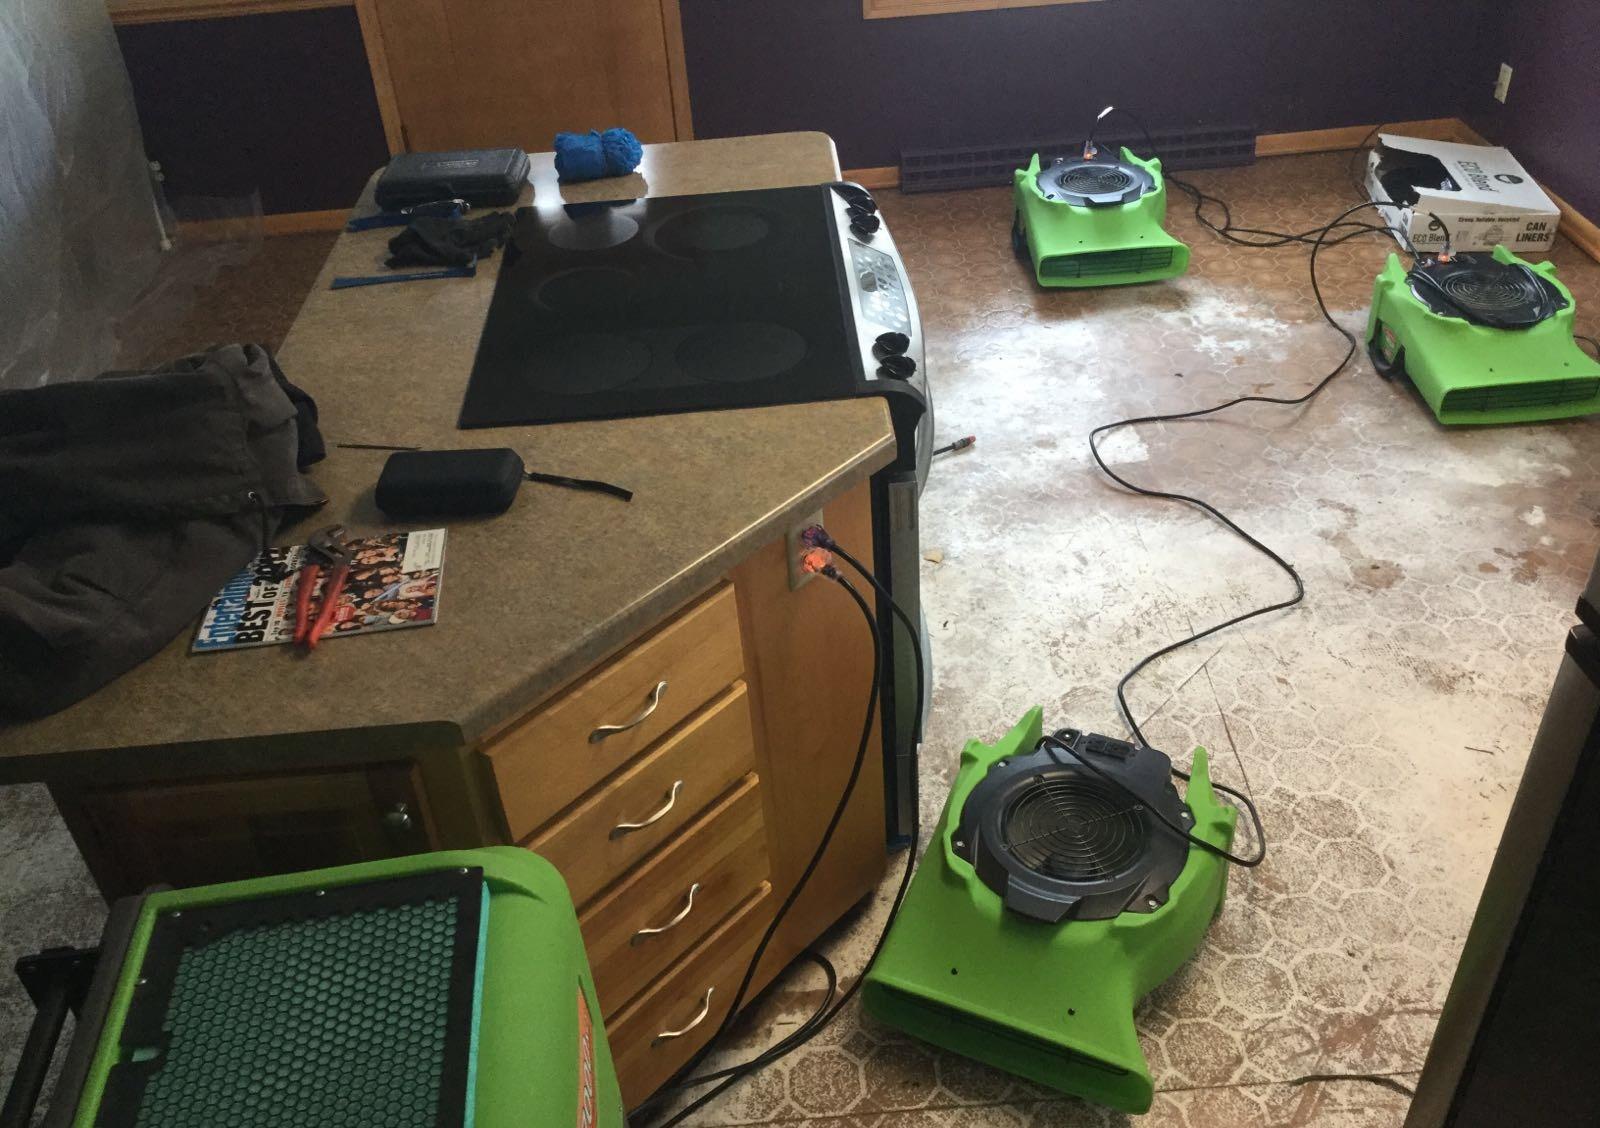 Got the SERVPRO air movers up and running!